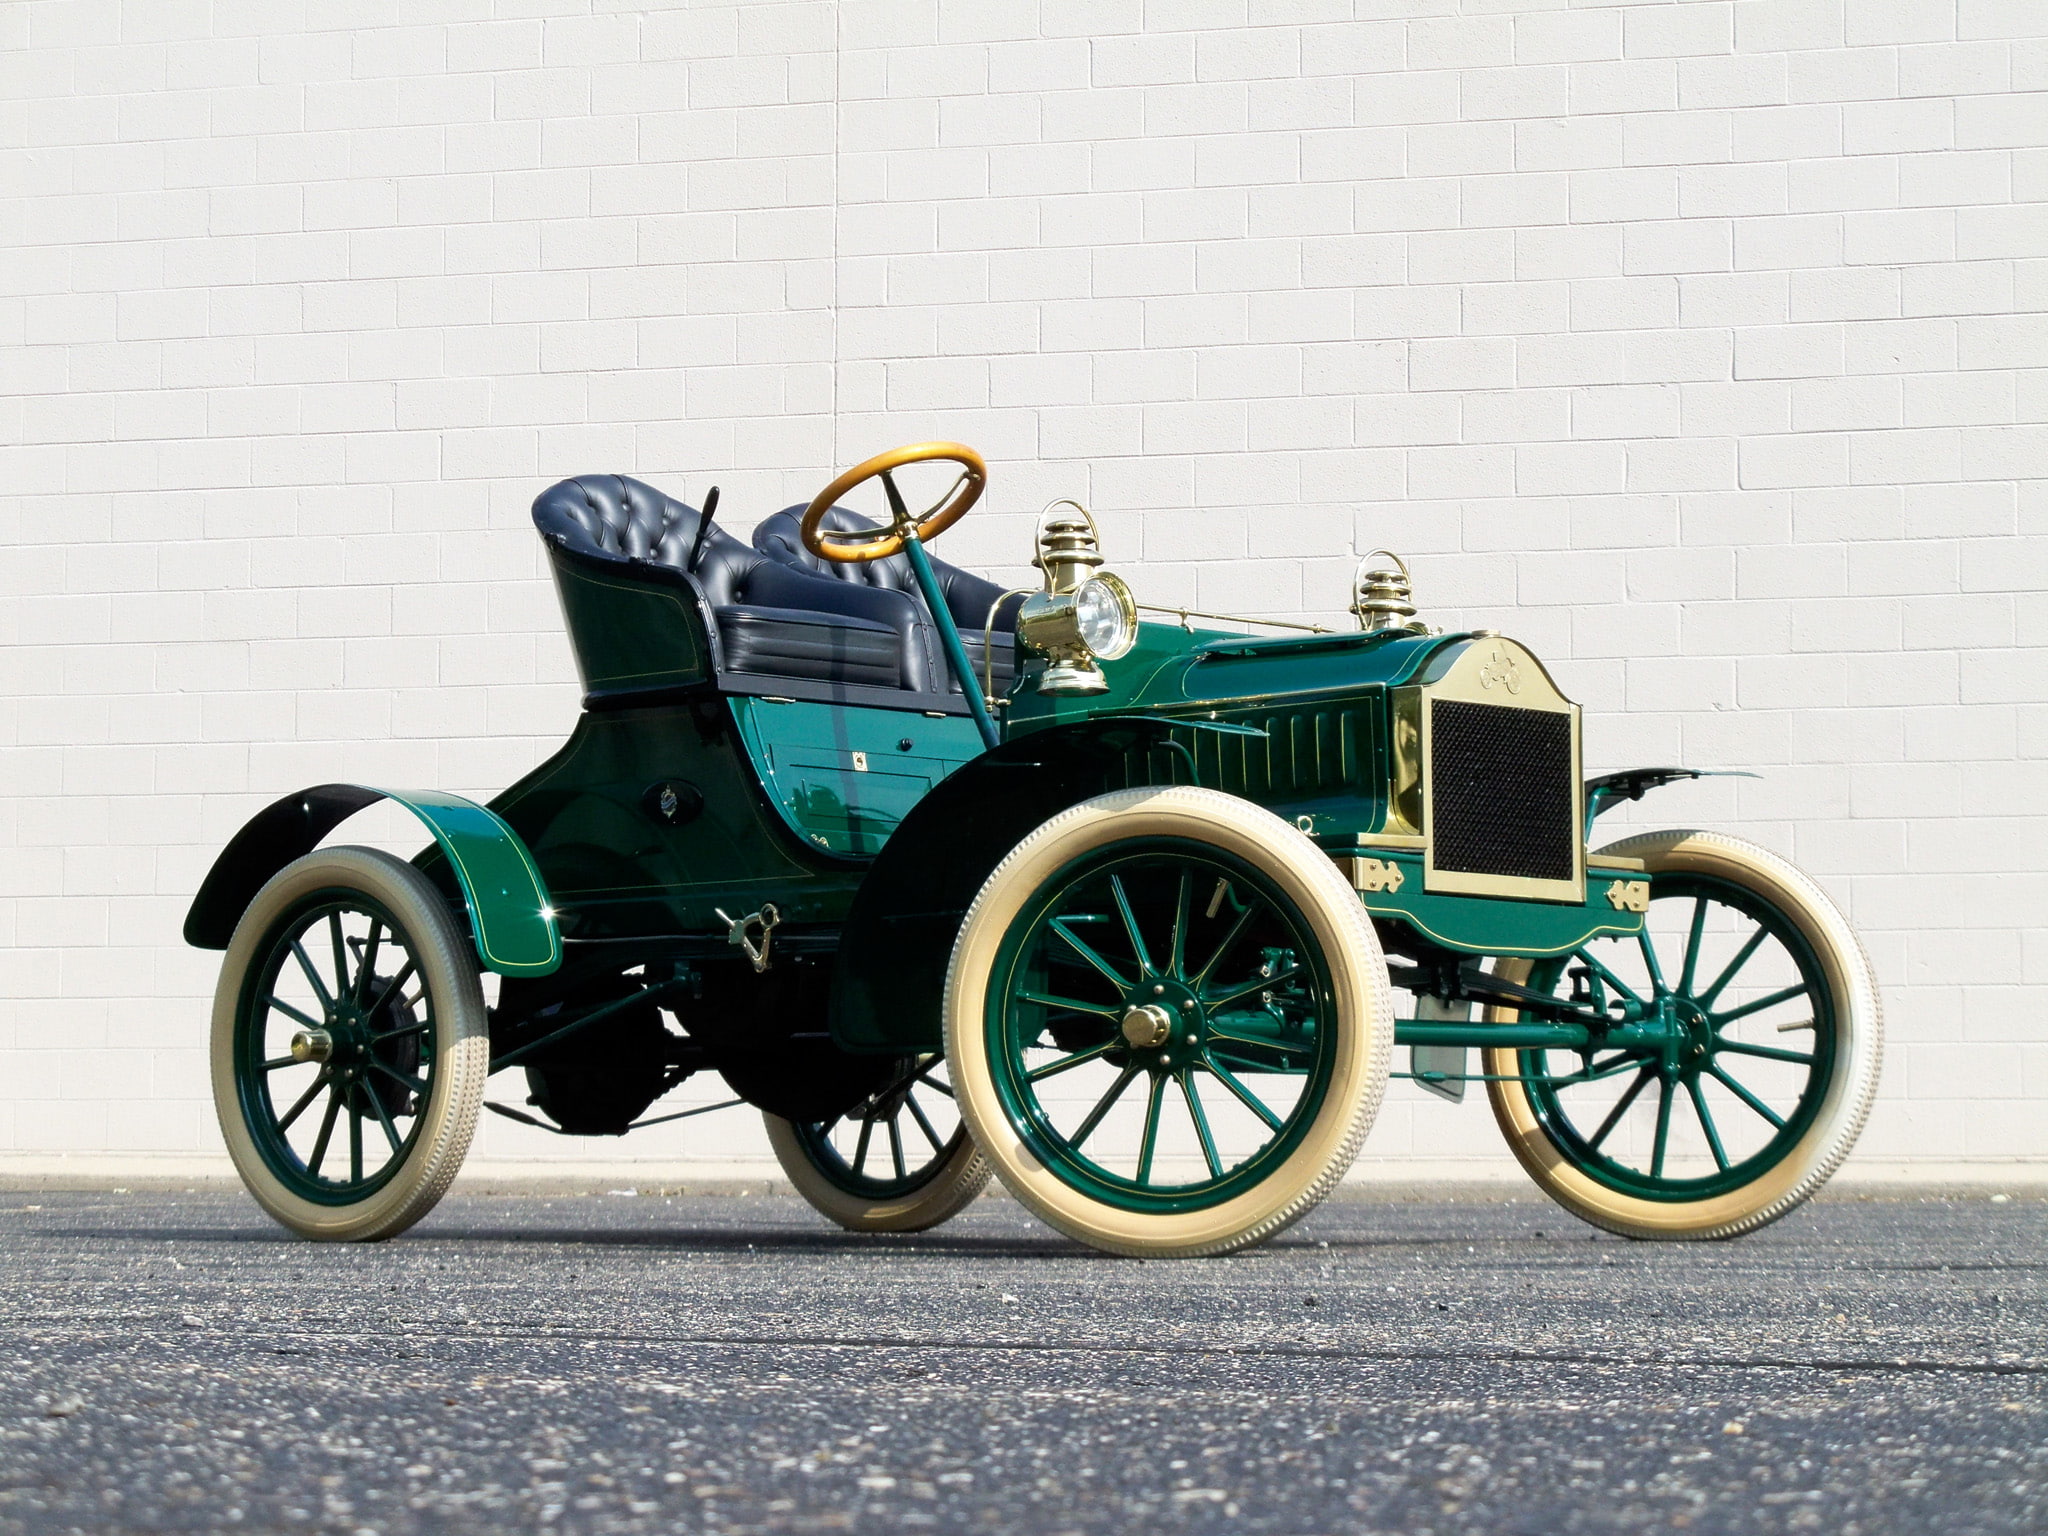 1904, french, front, oldsmobile, retro, runabout, touring